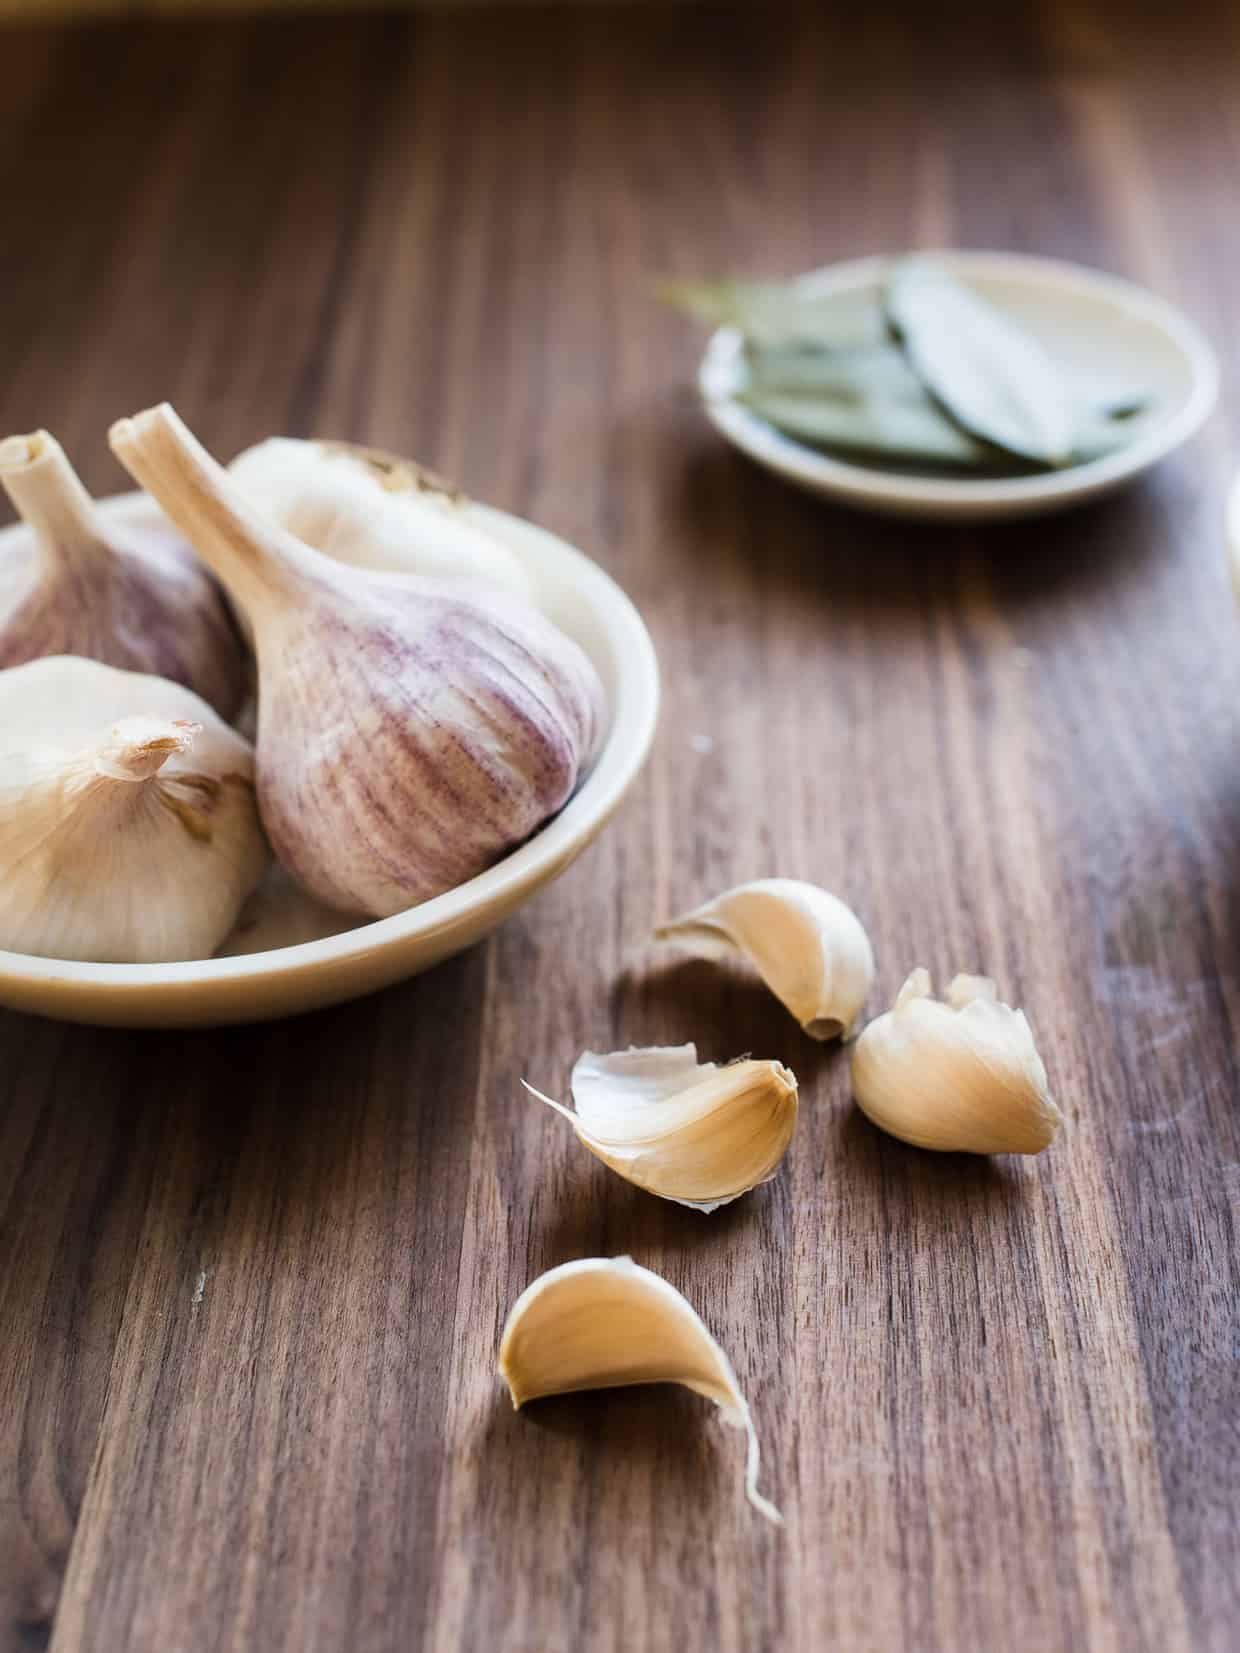 Garlic cloves in a bowl and on a wooden surface.